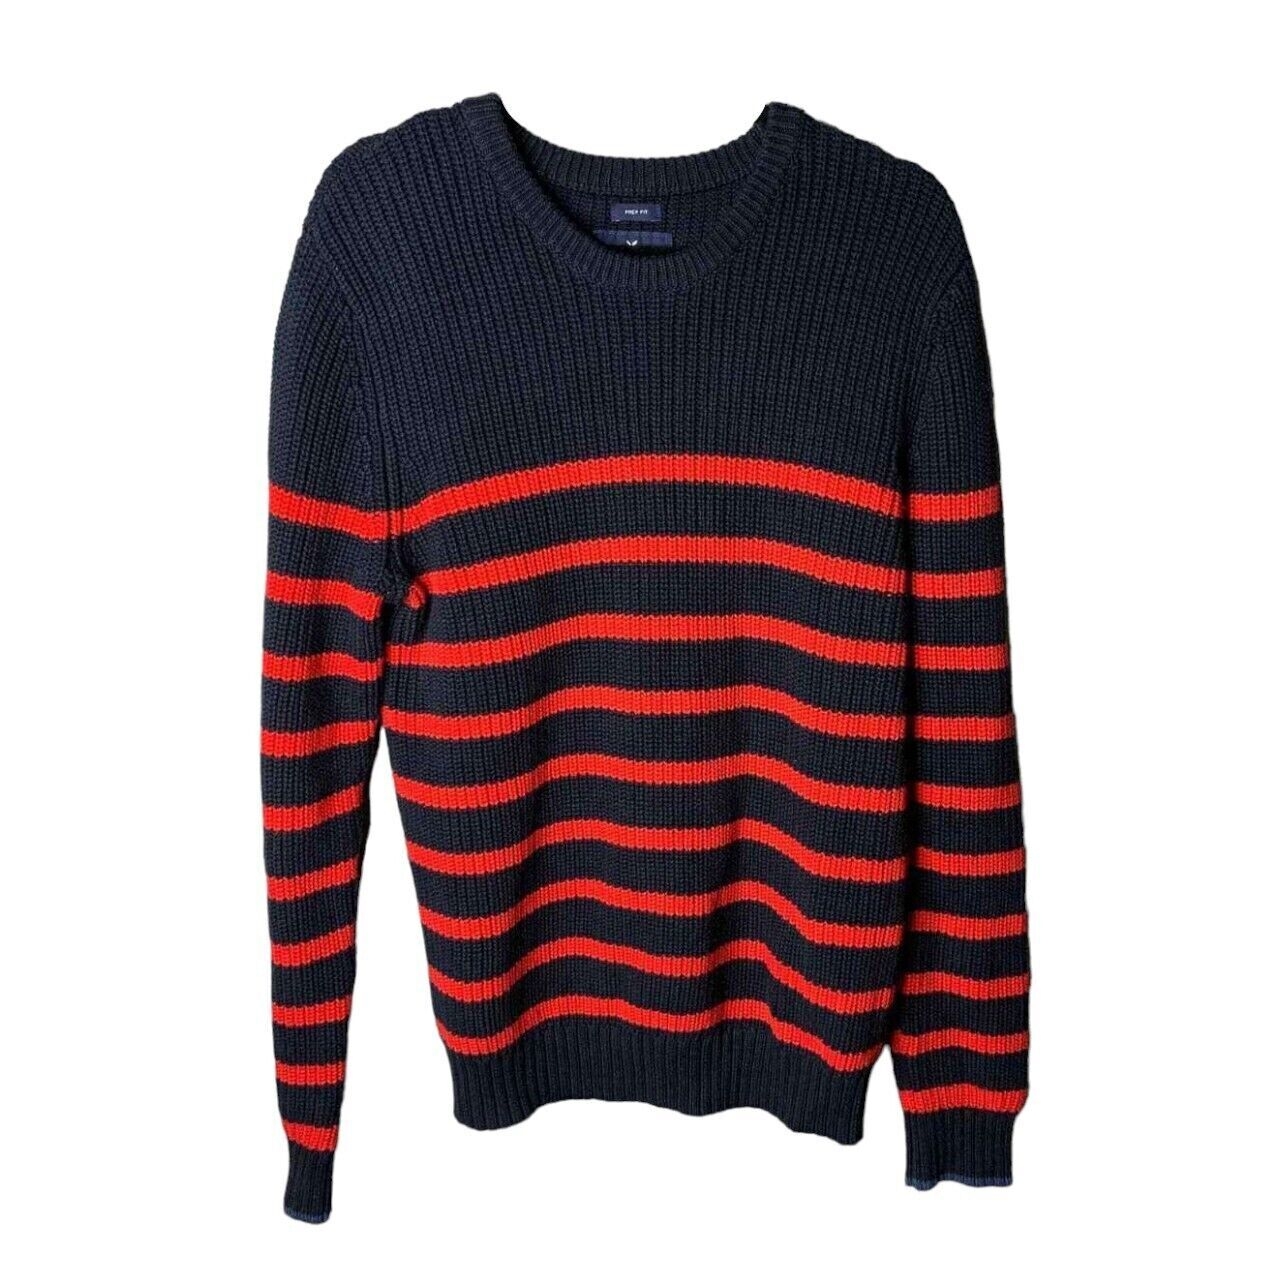 American Eagle Black & Red Stripes Sweater